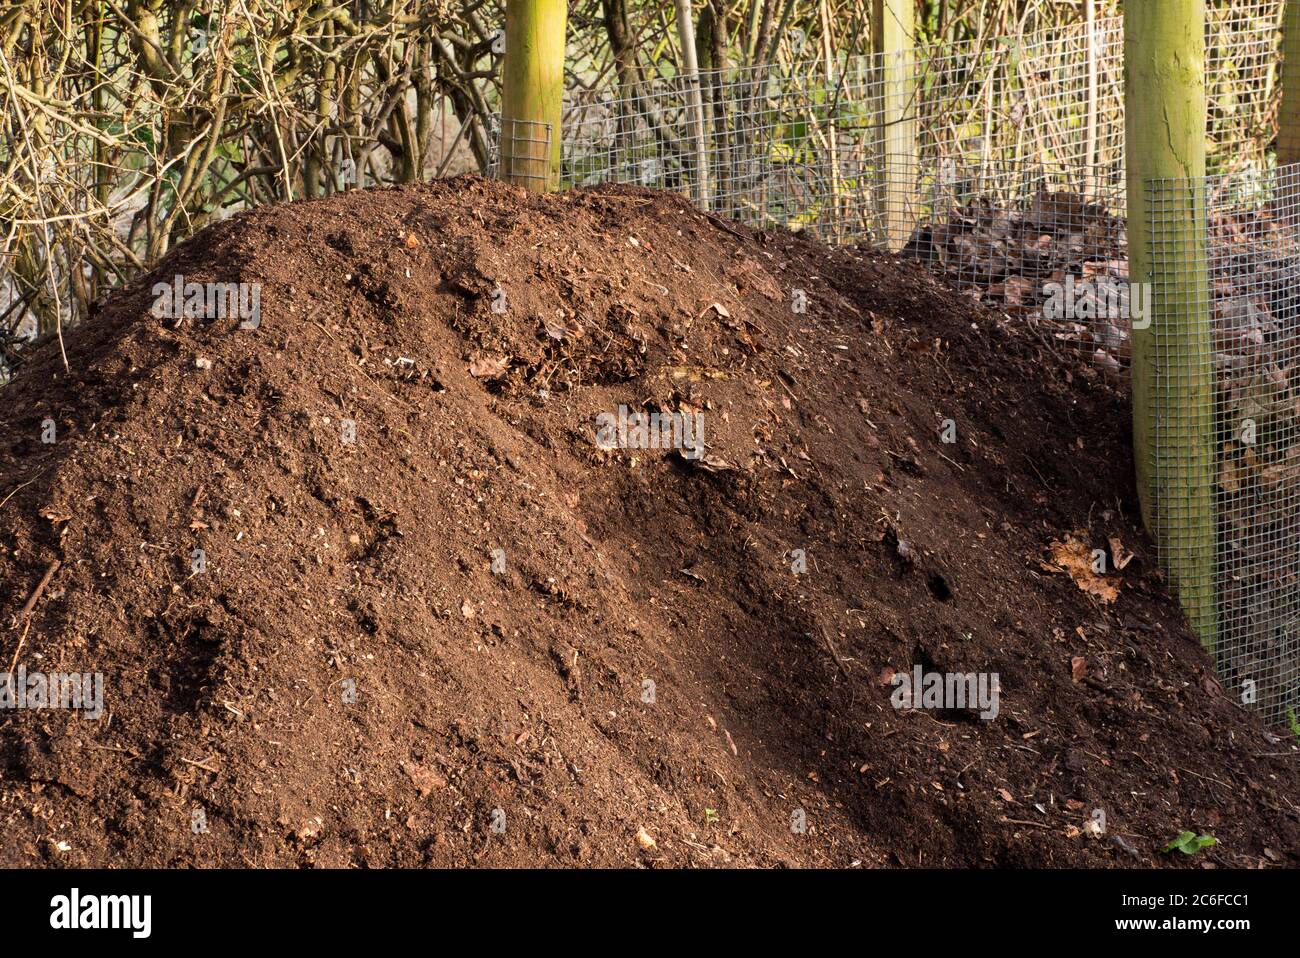 Heap of fully composted leaves in wire cage. England, UK. Stock Photo